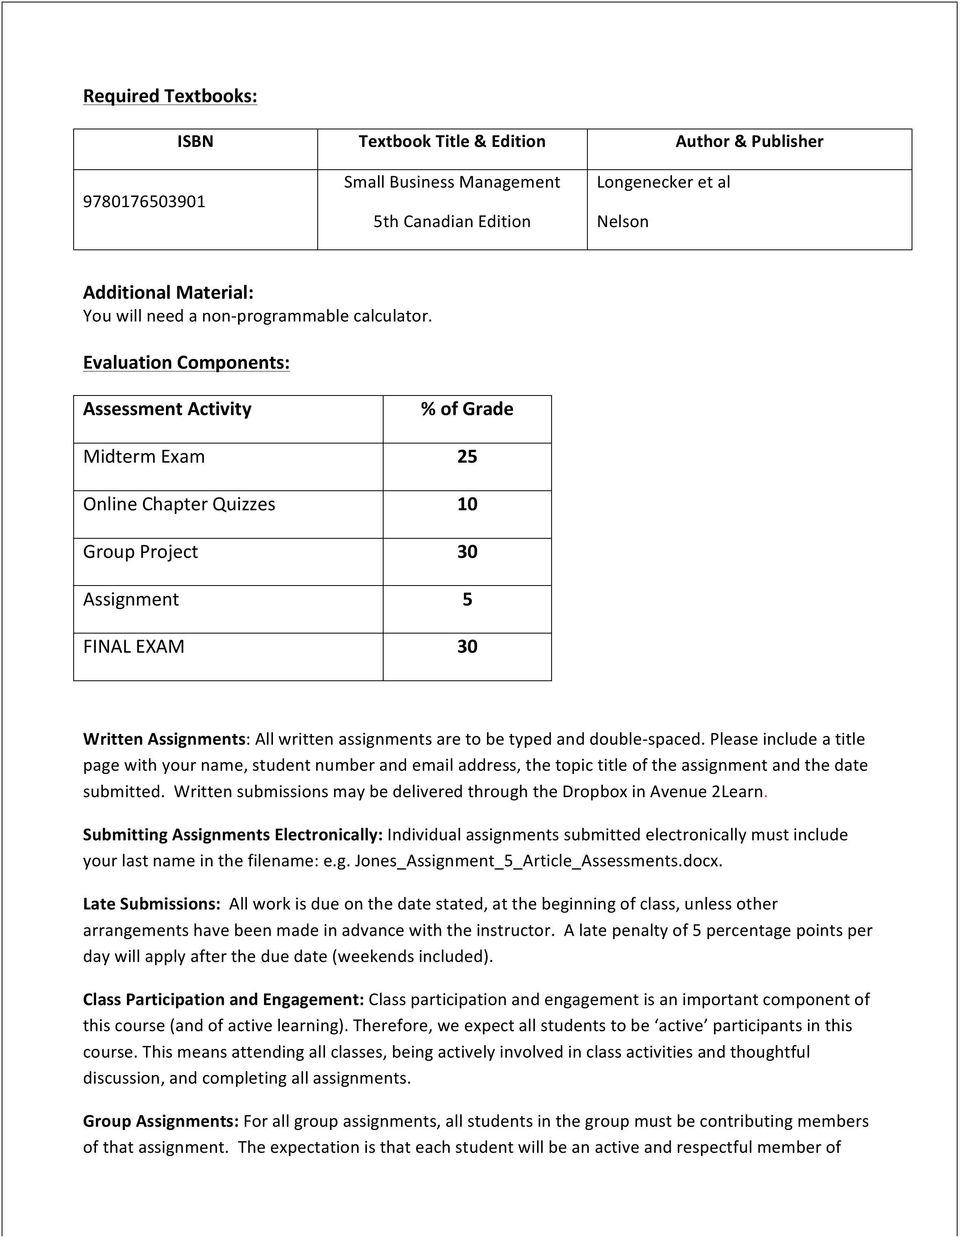 Evaluation Components: Assessment Activity Midterm Exam Online Chapter Quizzes Group Project Assignment FINAL EXAM % of Grade 25 10 30 5 30 Written Assignments: All written assignments are to be